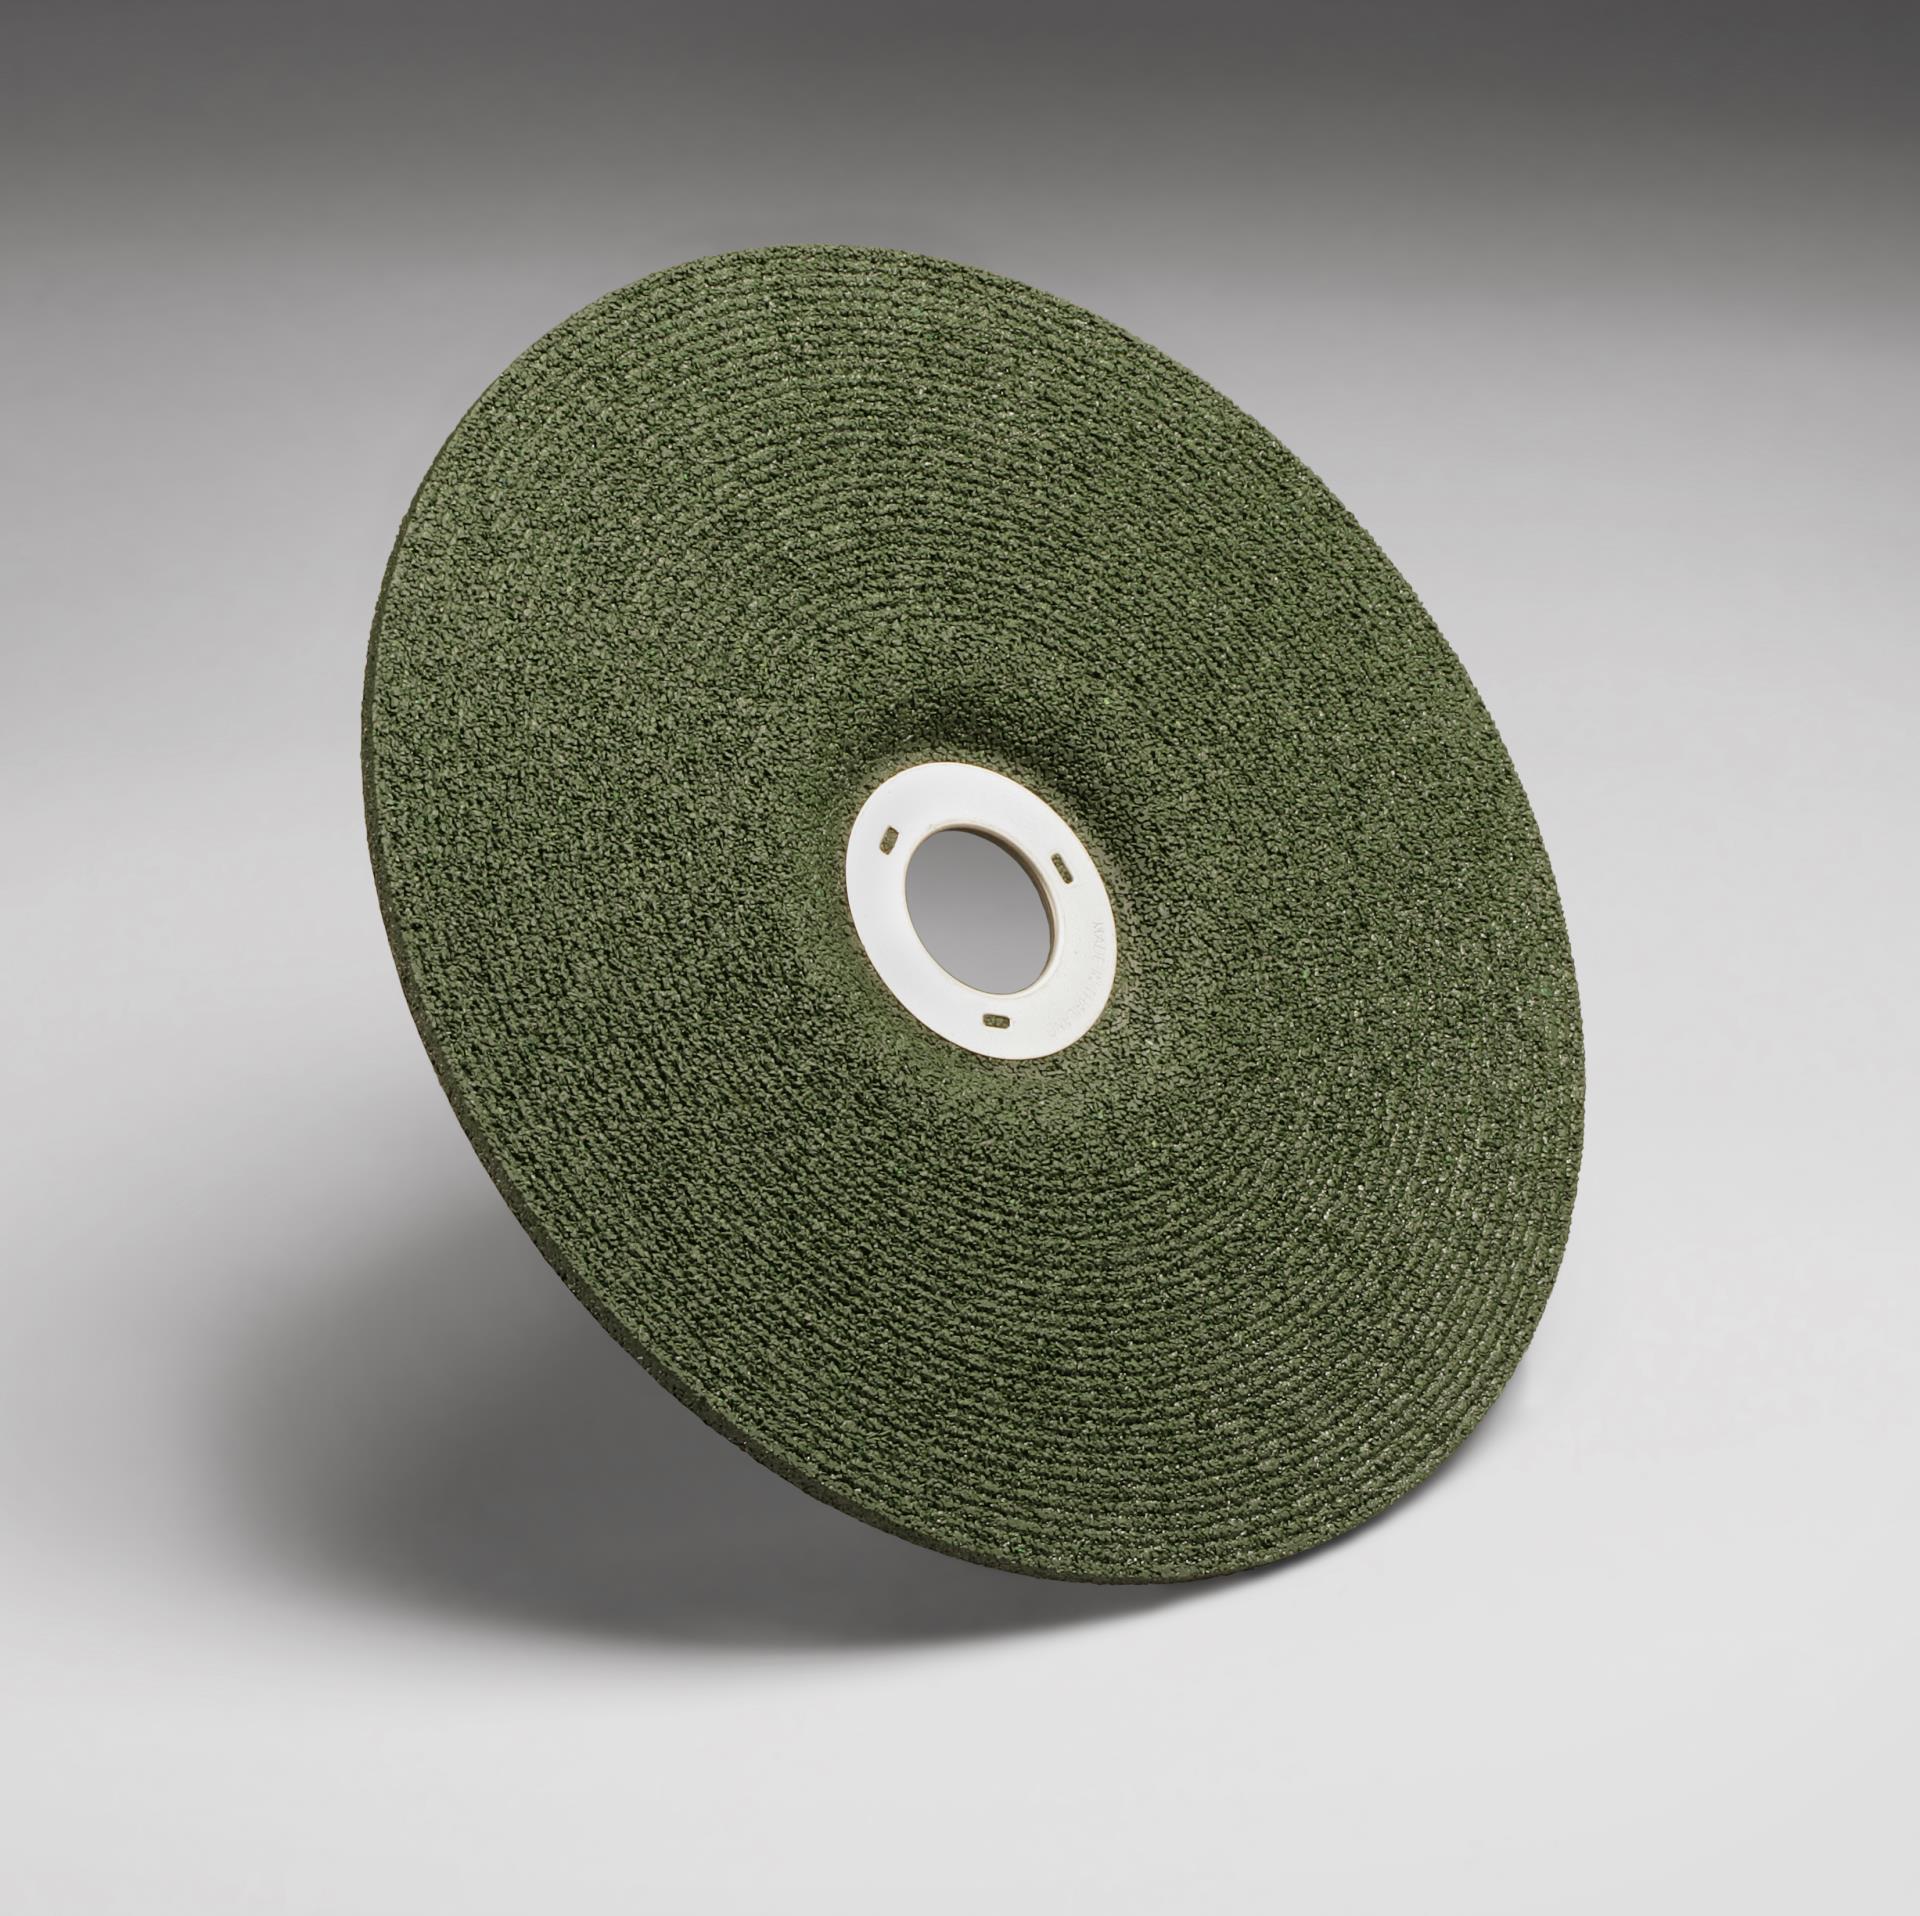 https://www.e-aircraftsupply.com/ItemImages/10/7010359910_3M_Green_Corps_CuttingGrinding_Wheel.jpg